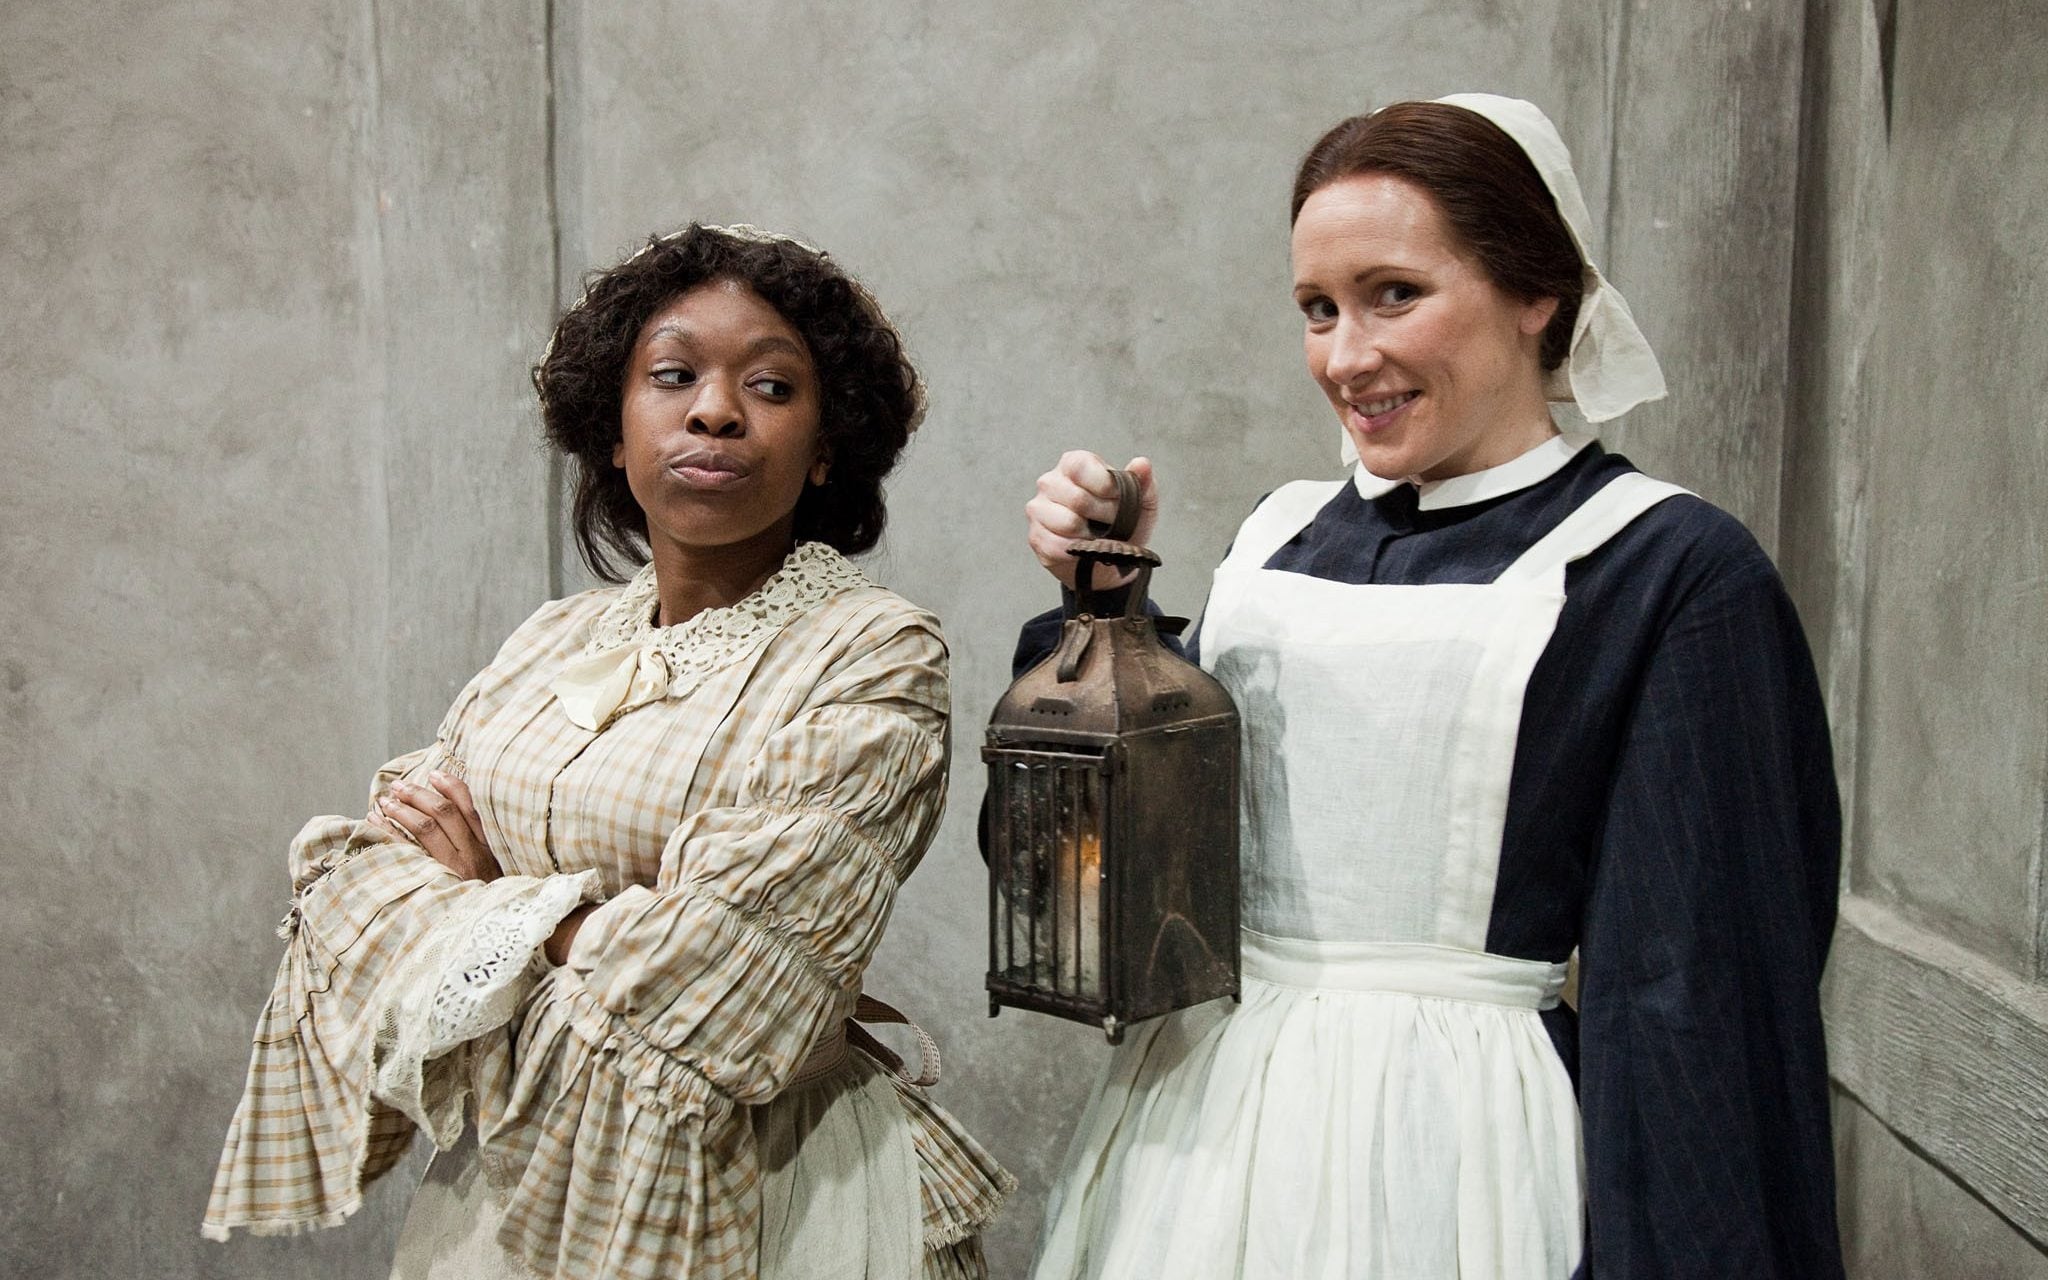 horrible histories black history shows have ‘true factor’